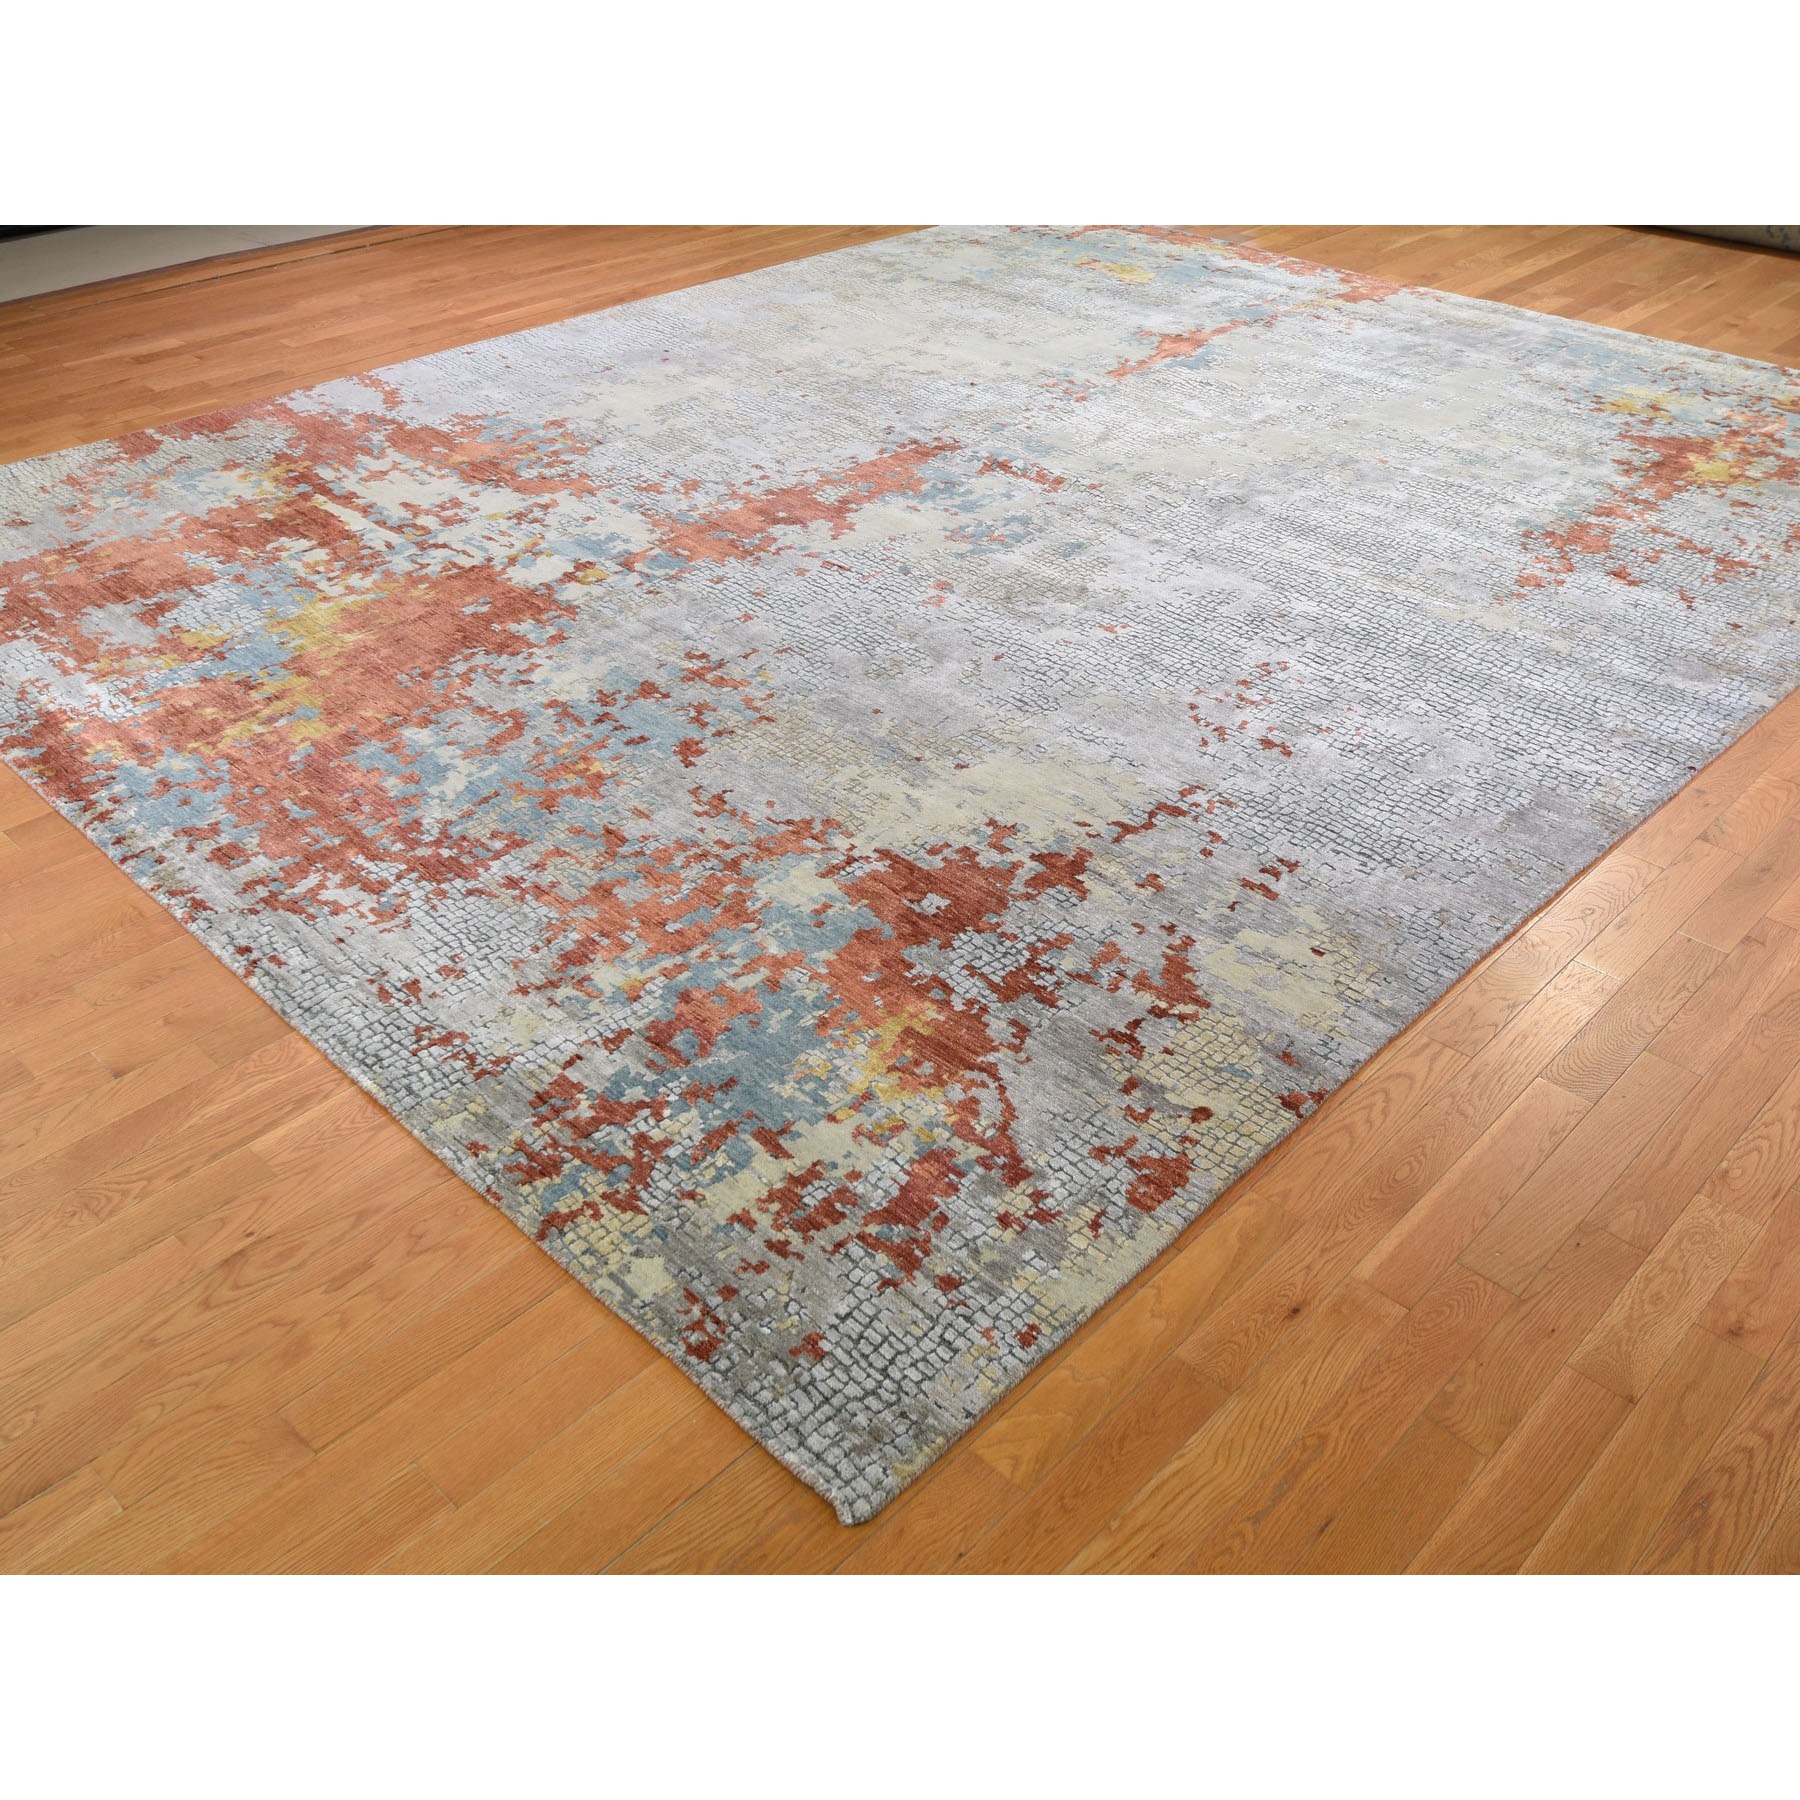 11-10 x14-9  Oversized Wool And Silk Abstract With Fire Mosaic Design Hand Knotted Oriental Rug 